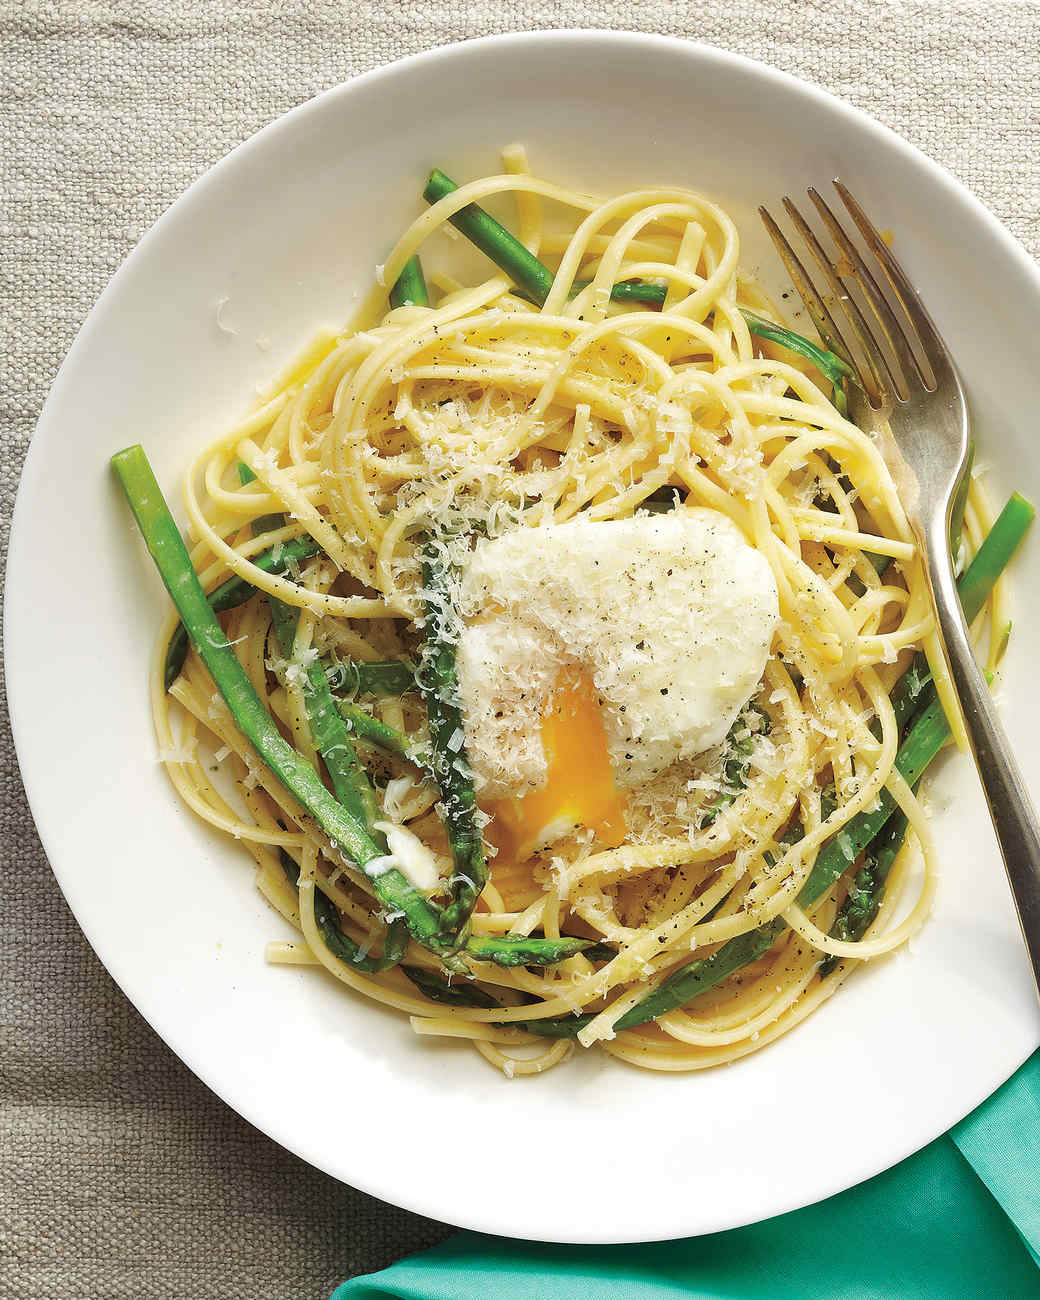 Linguine with Asparagus and Egg